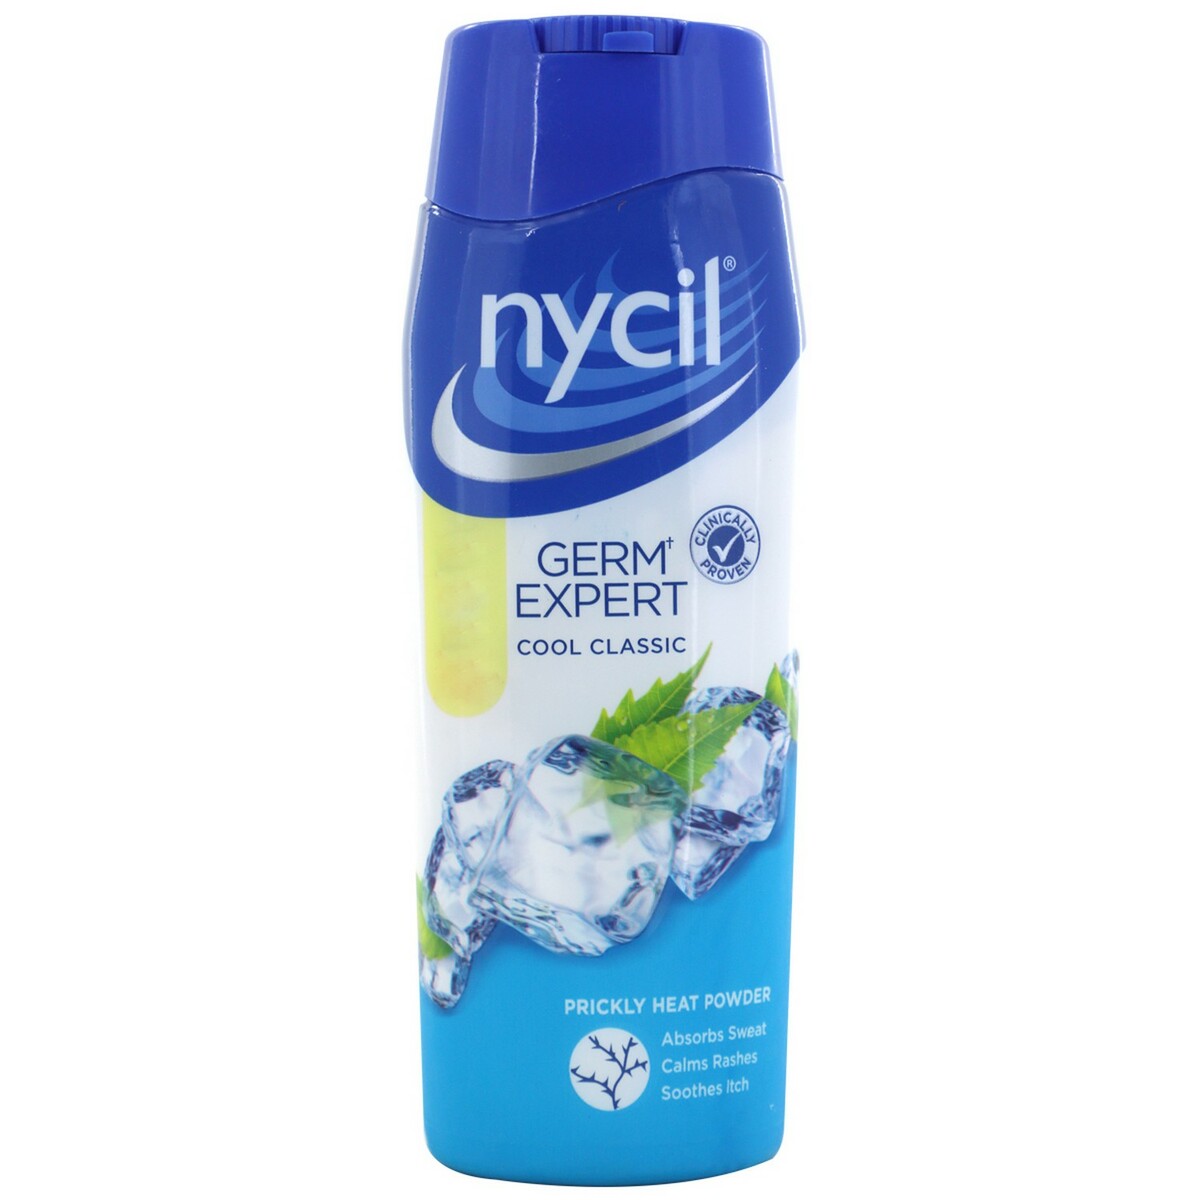 Nycil Prickly Heat Powder Cool Classic 150g